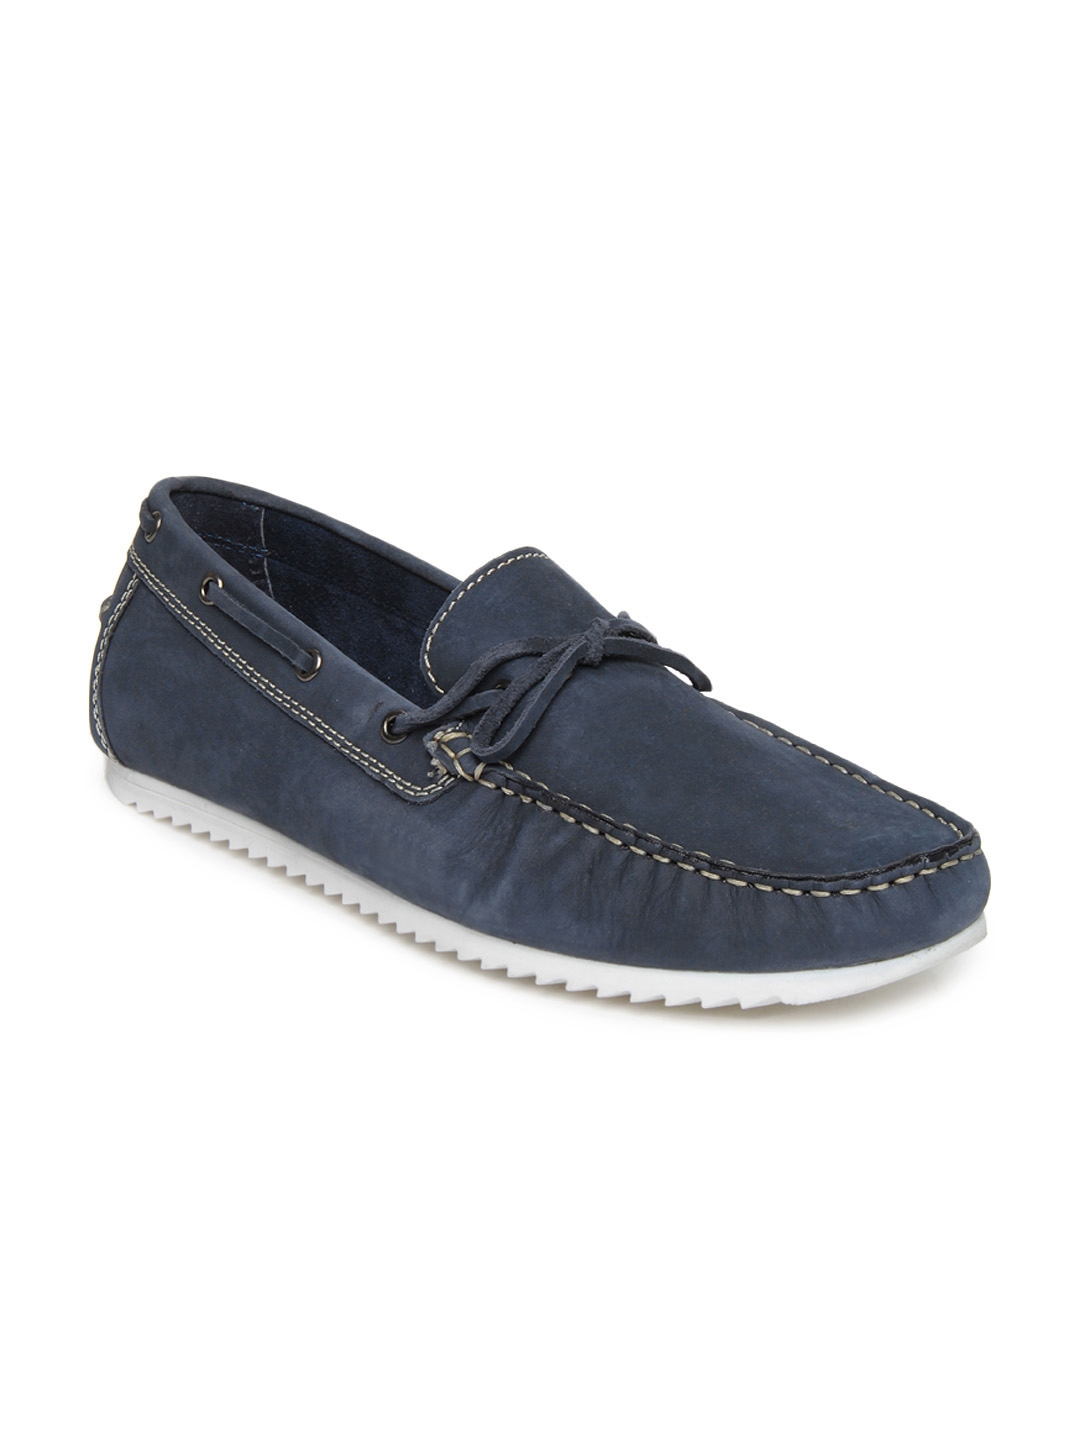 Buy United Colors Of Benetton Men Navy Leather Boat Shoes - Casual ...